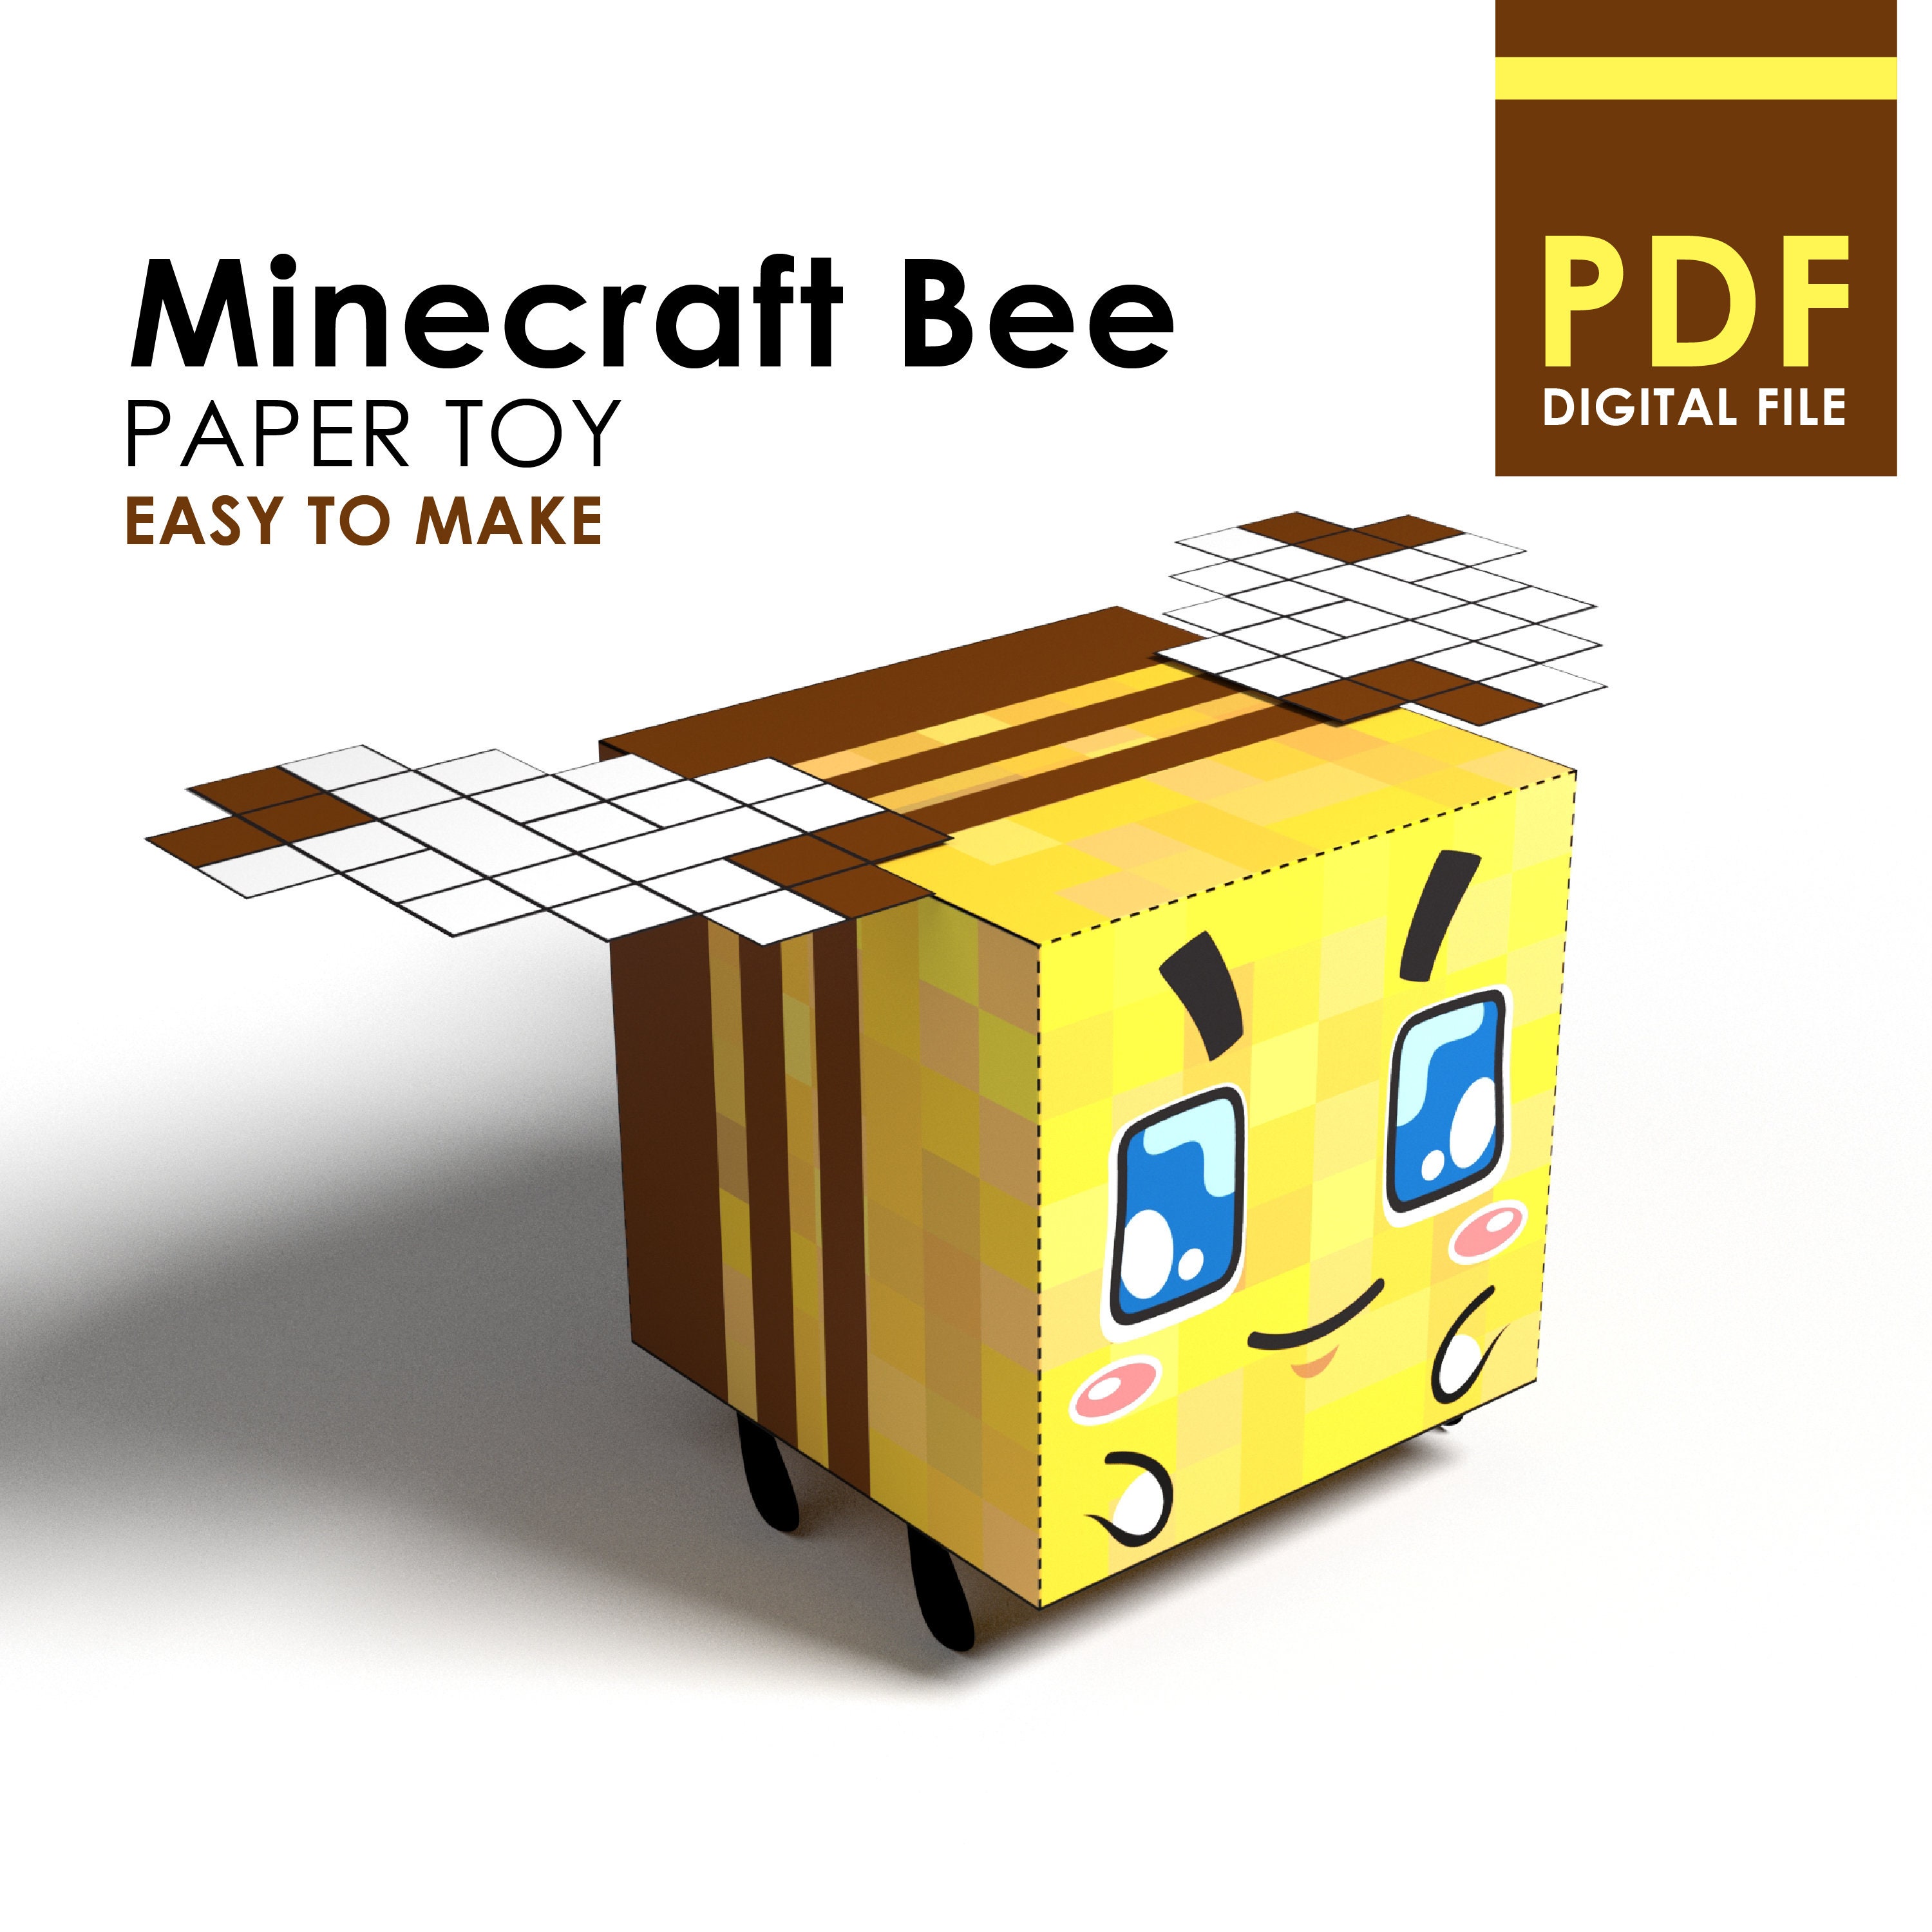 Minecraft bee DIY paper toy papercraft kit cut and glue | Etsy